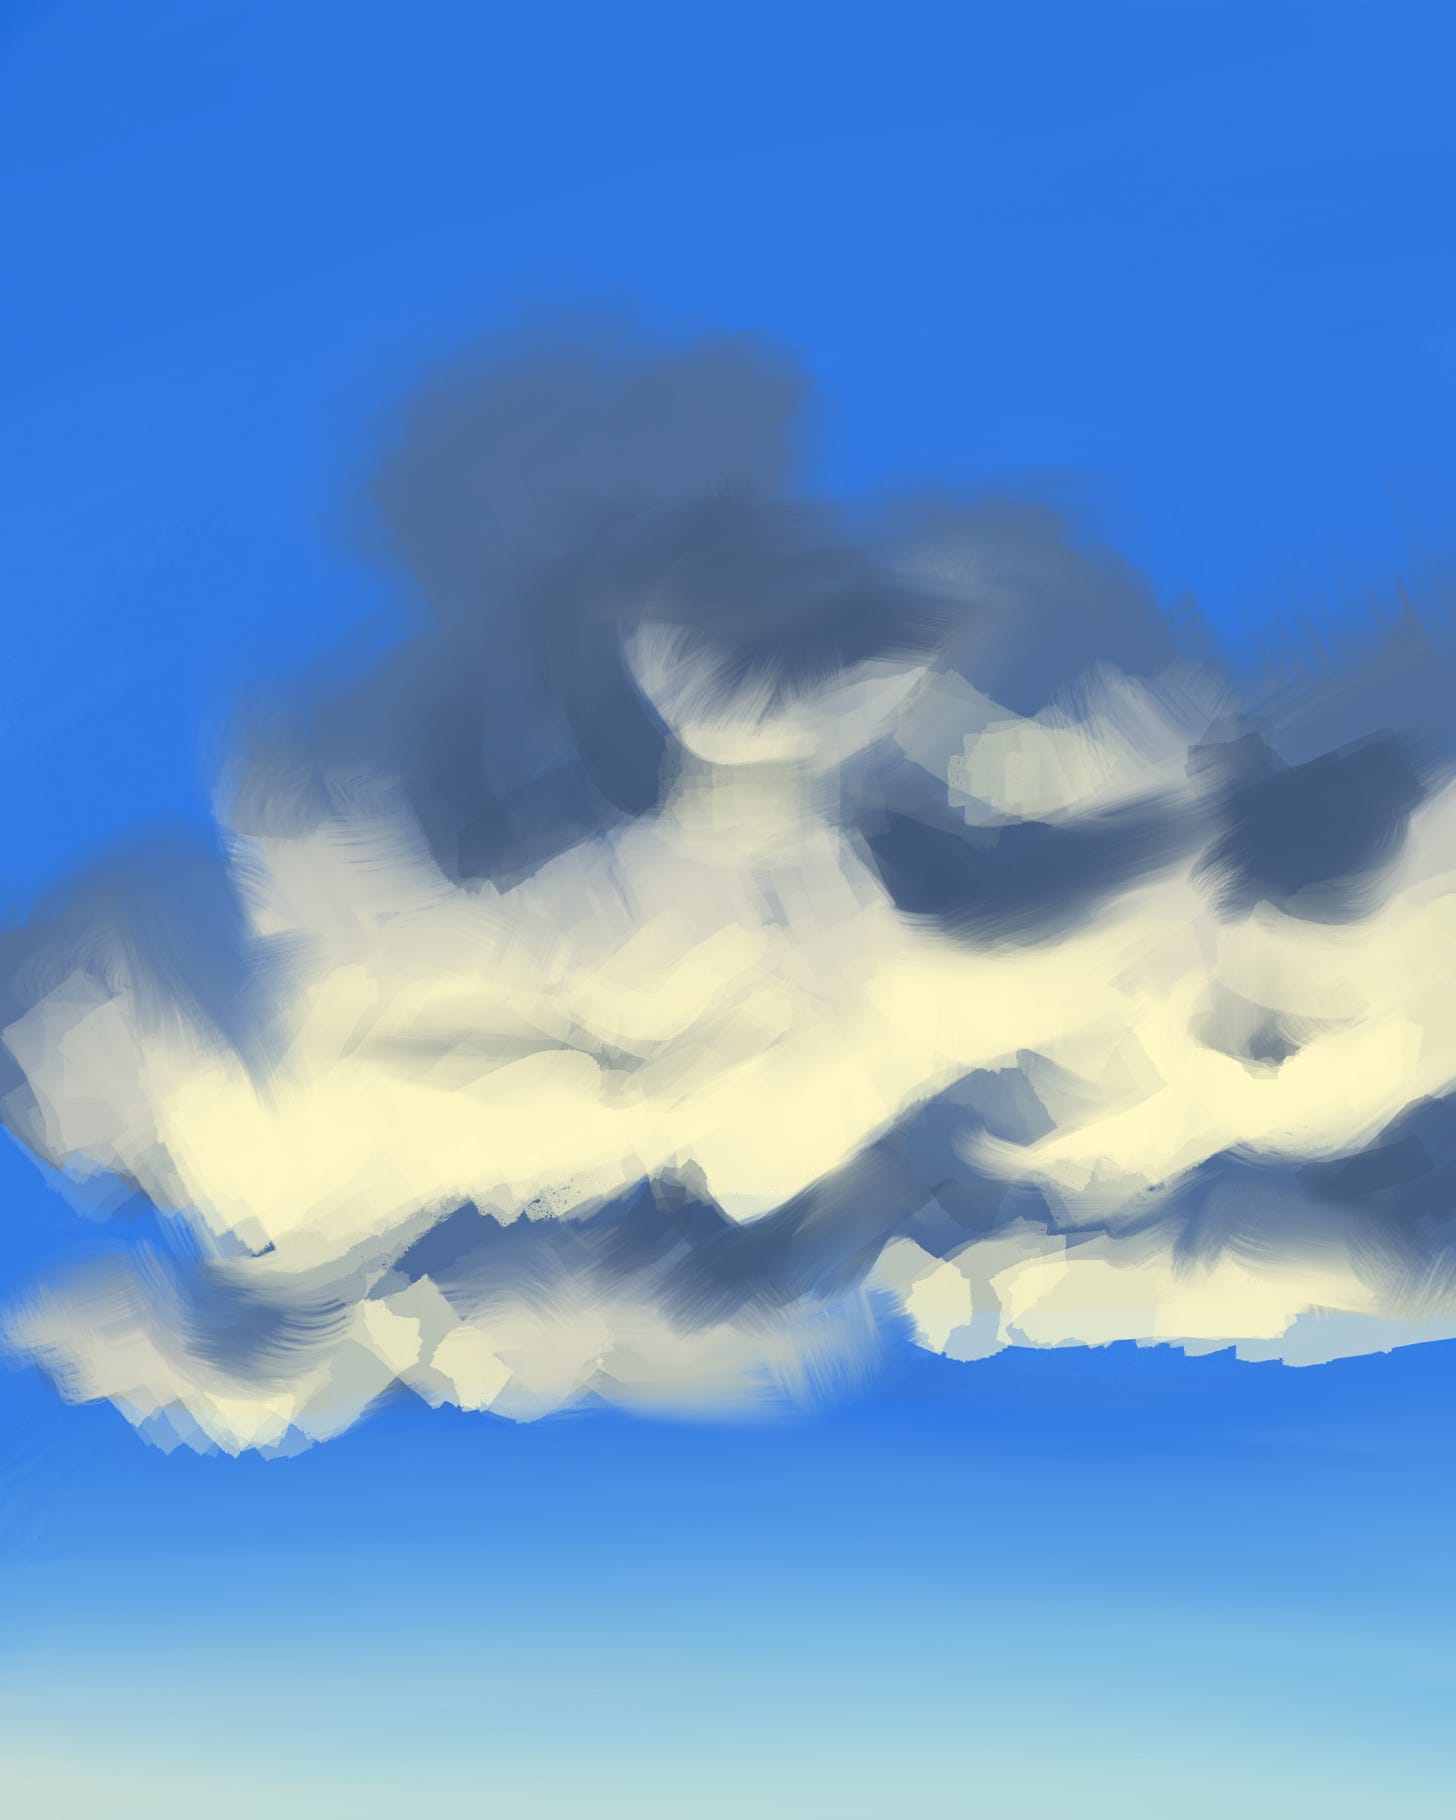 Painted sketch of clouds at sunrise, lit from below